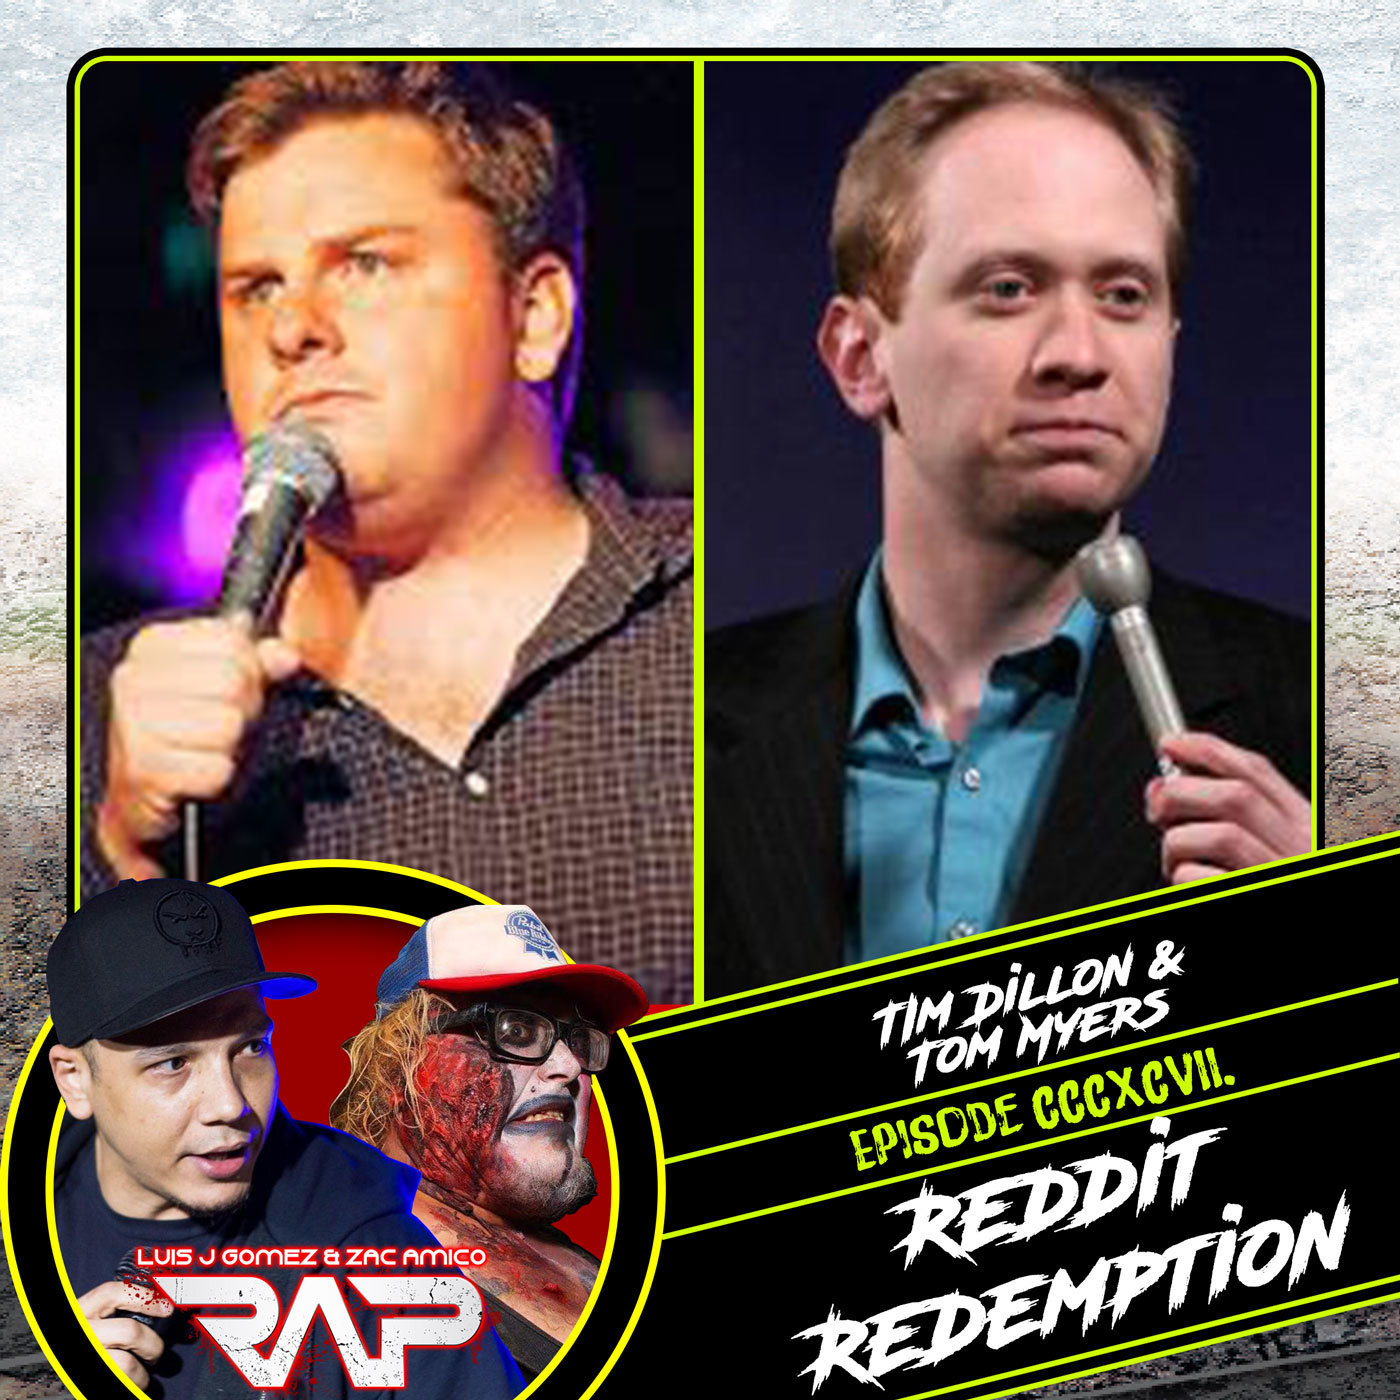 CCCXCVII. Reddit Redemption (Tim Dillon & Tom Myers) by Real Ass